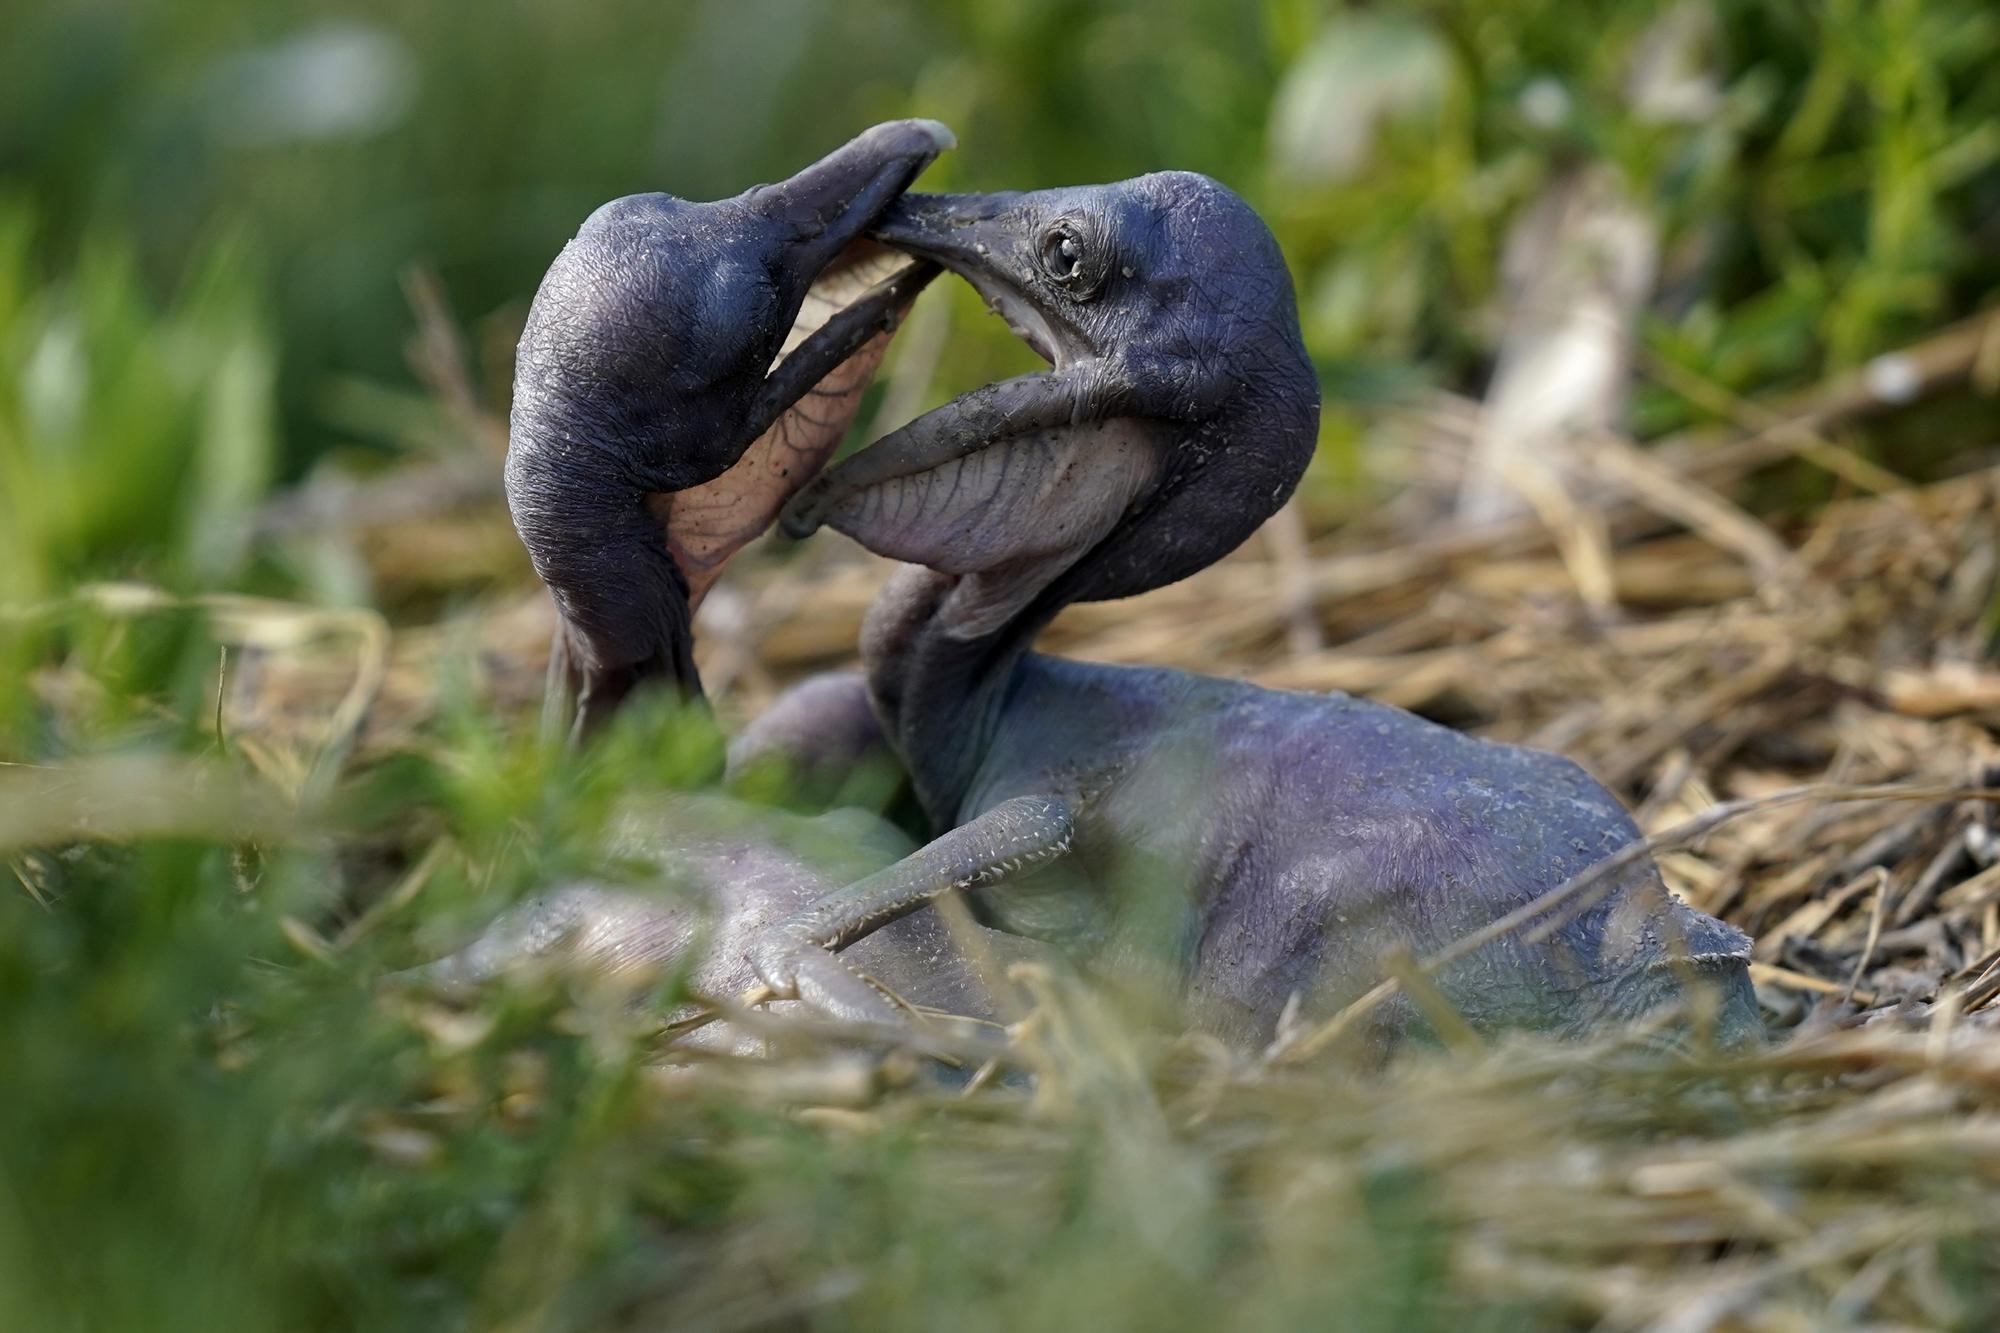 Young brown pelicans play in their nest on Raccoon Island, a Gulf of Mexico barrier island that is a nesting ground for brown pelicans, terns, seagulls and other birds, in Chauvin, La., Tuesday, May 17, 2022. (AP Photo/Gerald Herbert)